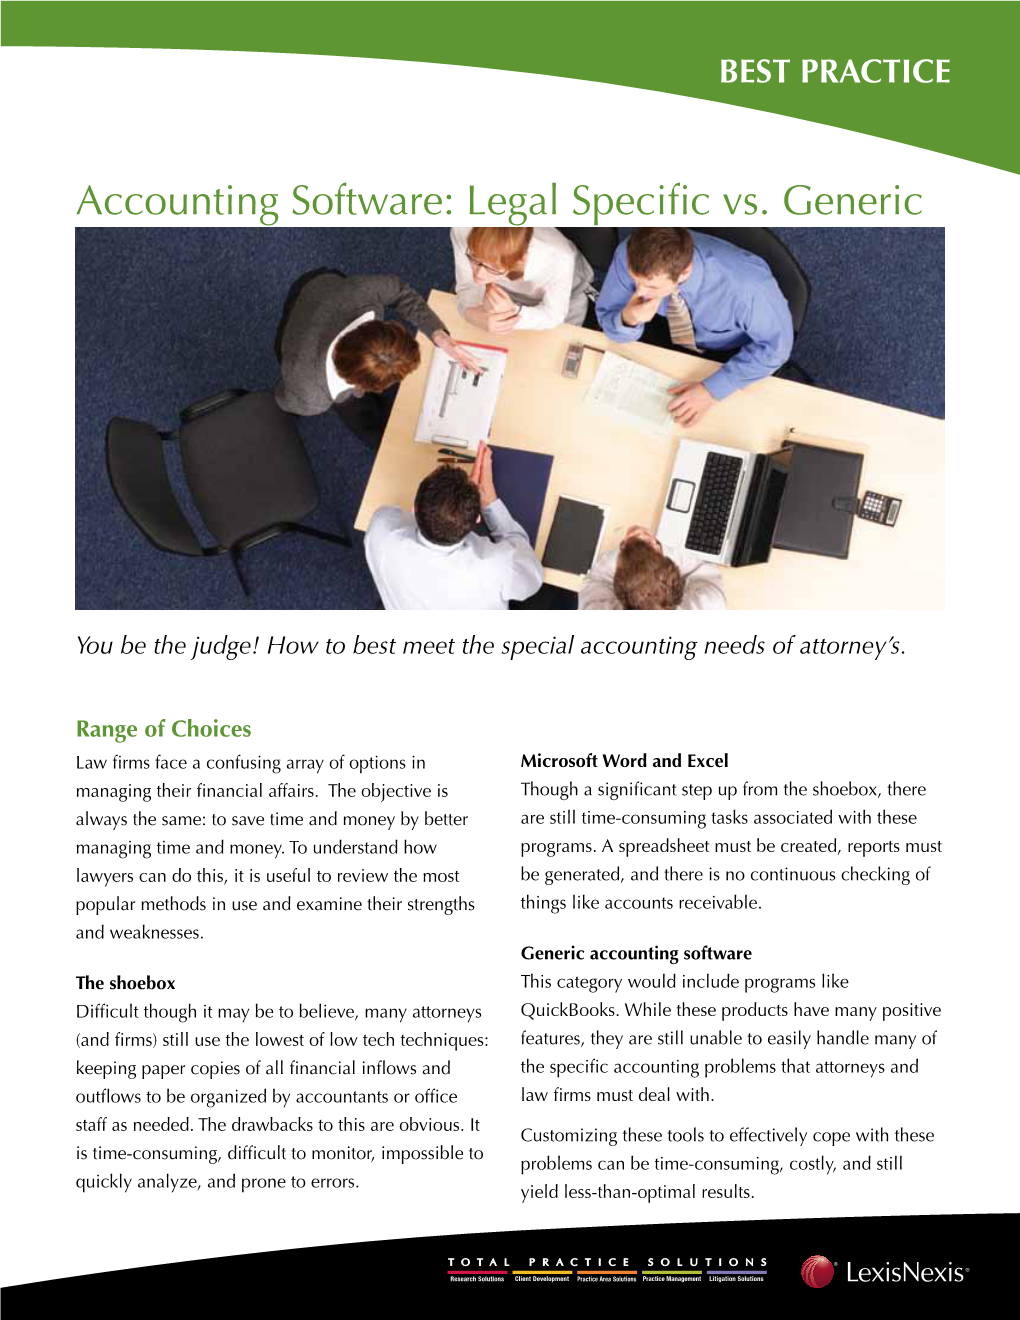 Accounting Software: Legal Specific Vs